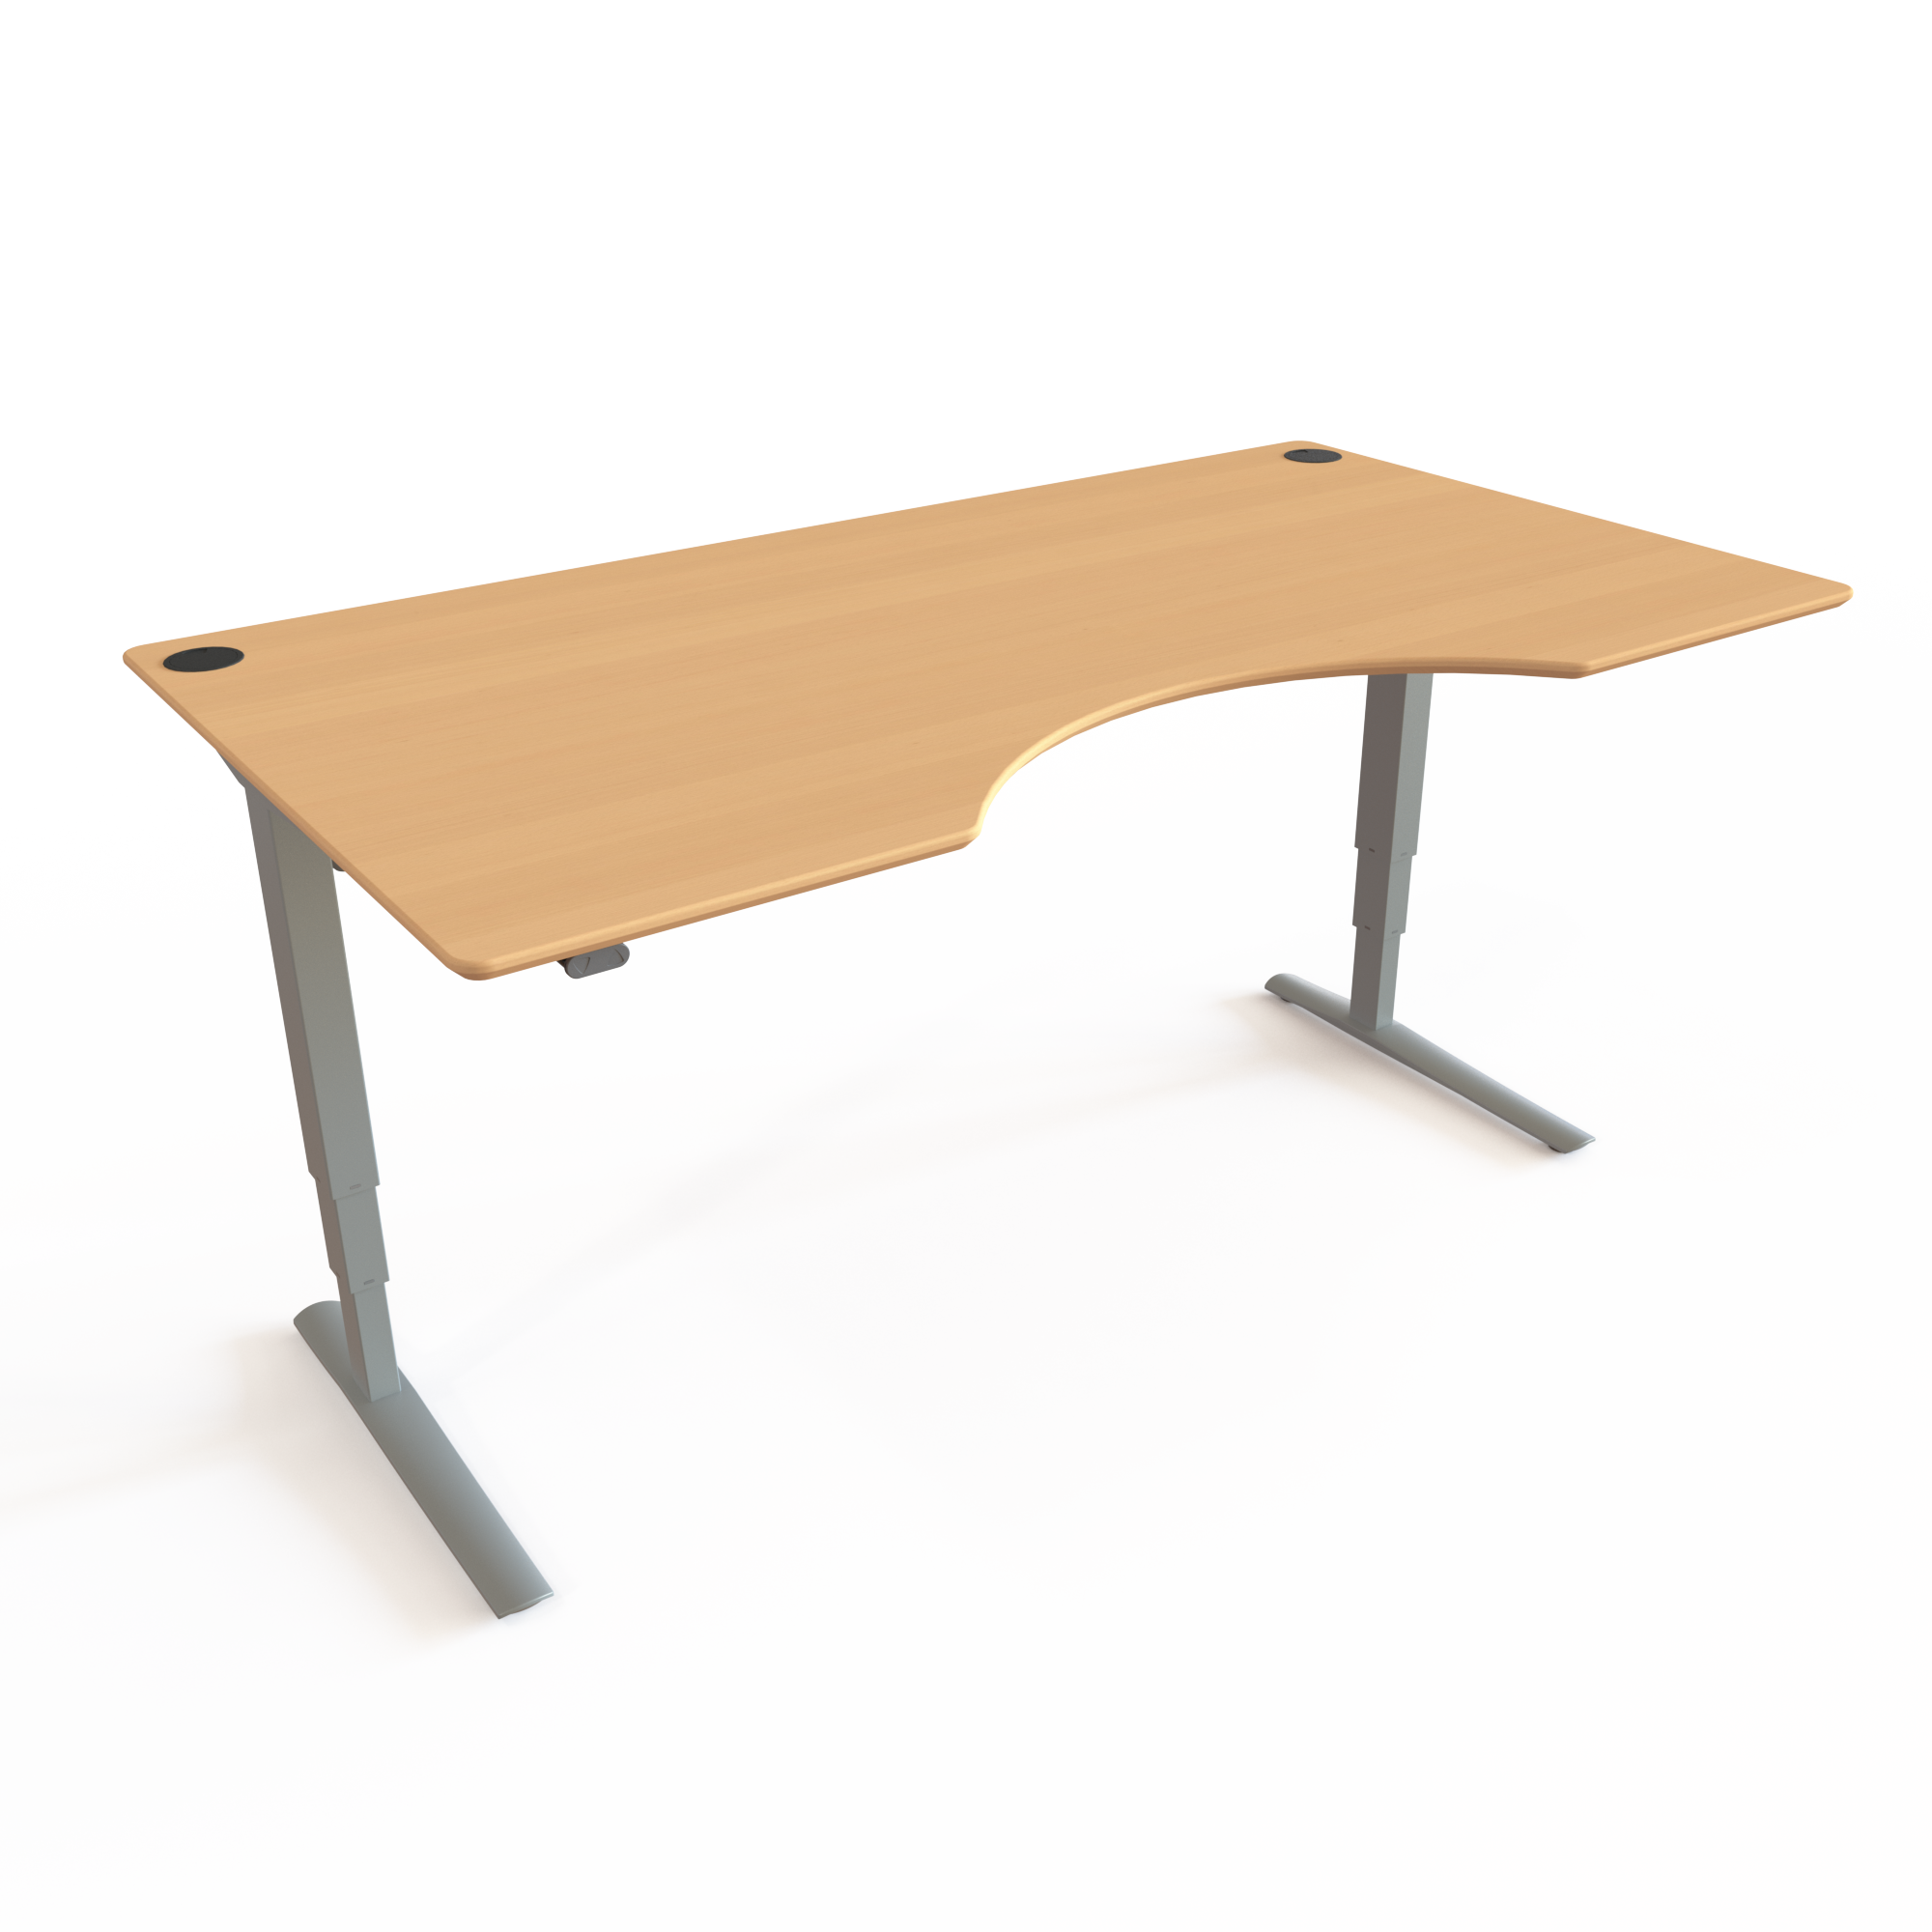 Electric Adjustable Desk | 180x100 cm | Beech with silver frame